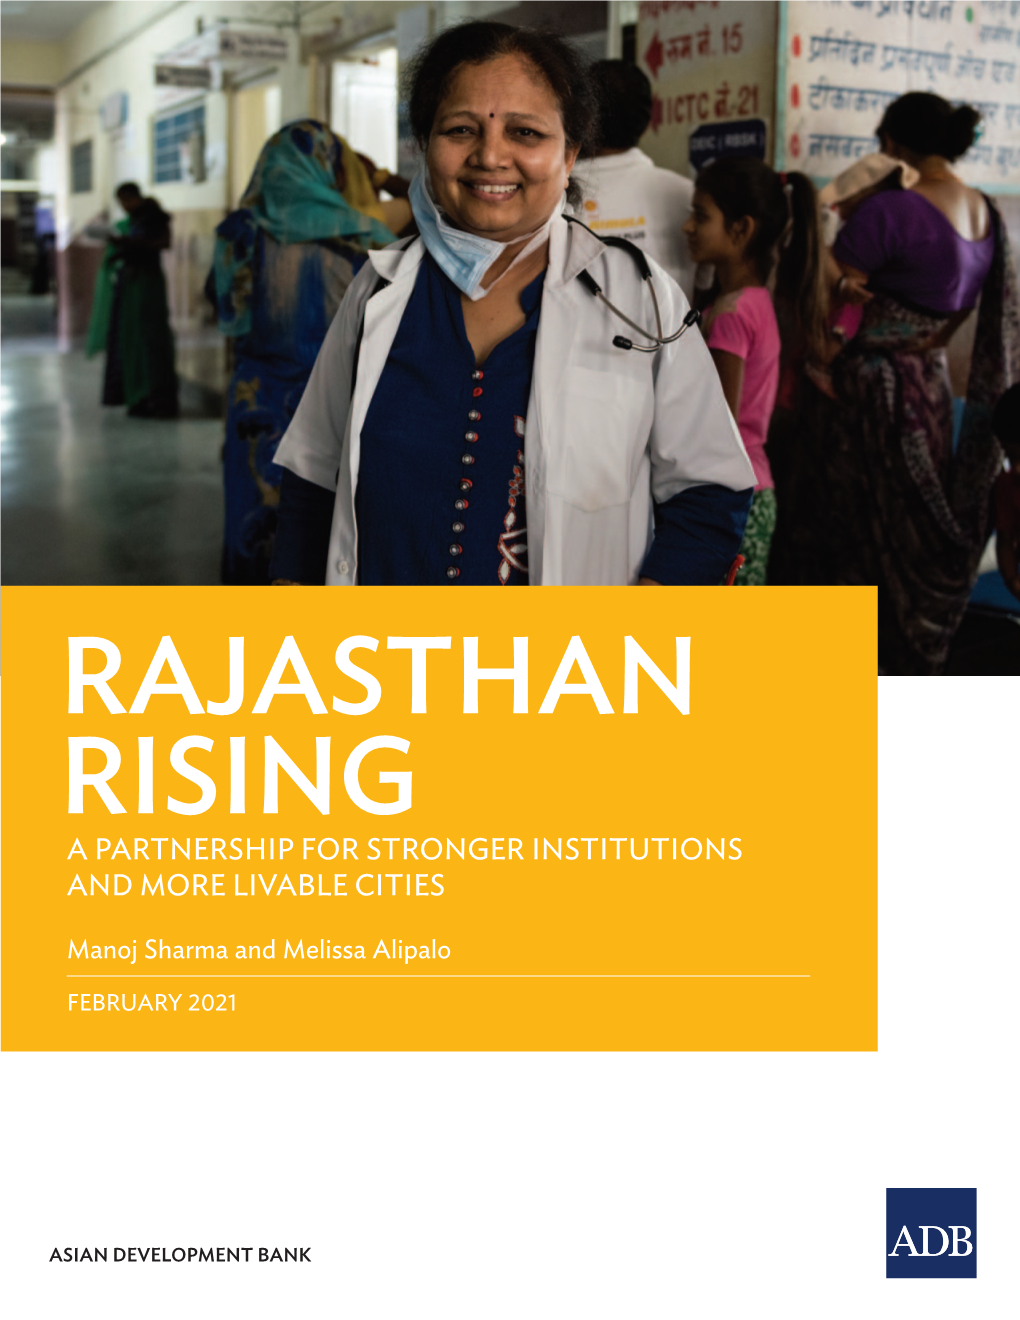 Rajasthan Rising: a Partnership for Strong Institutions and More Livable